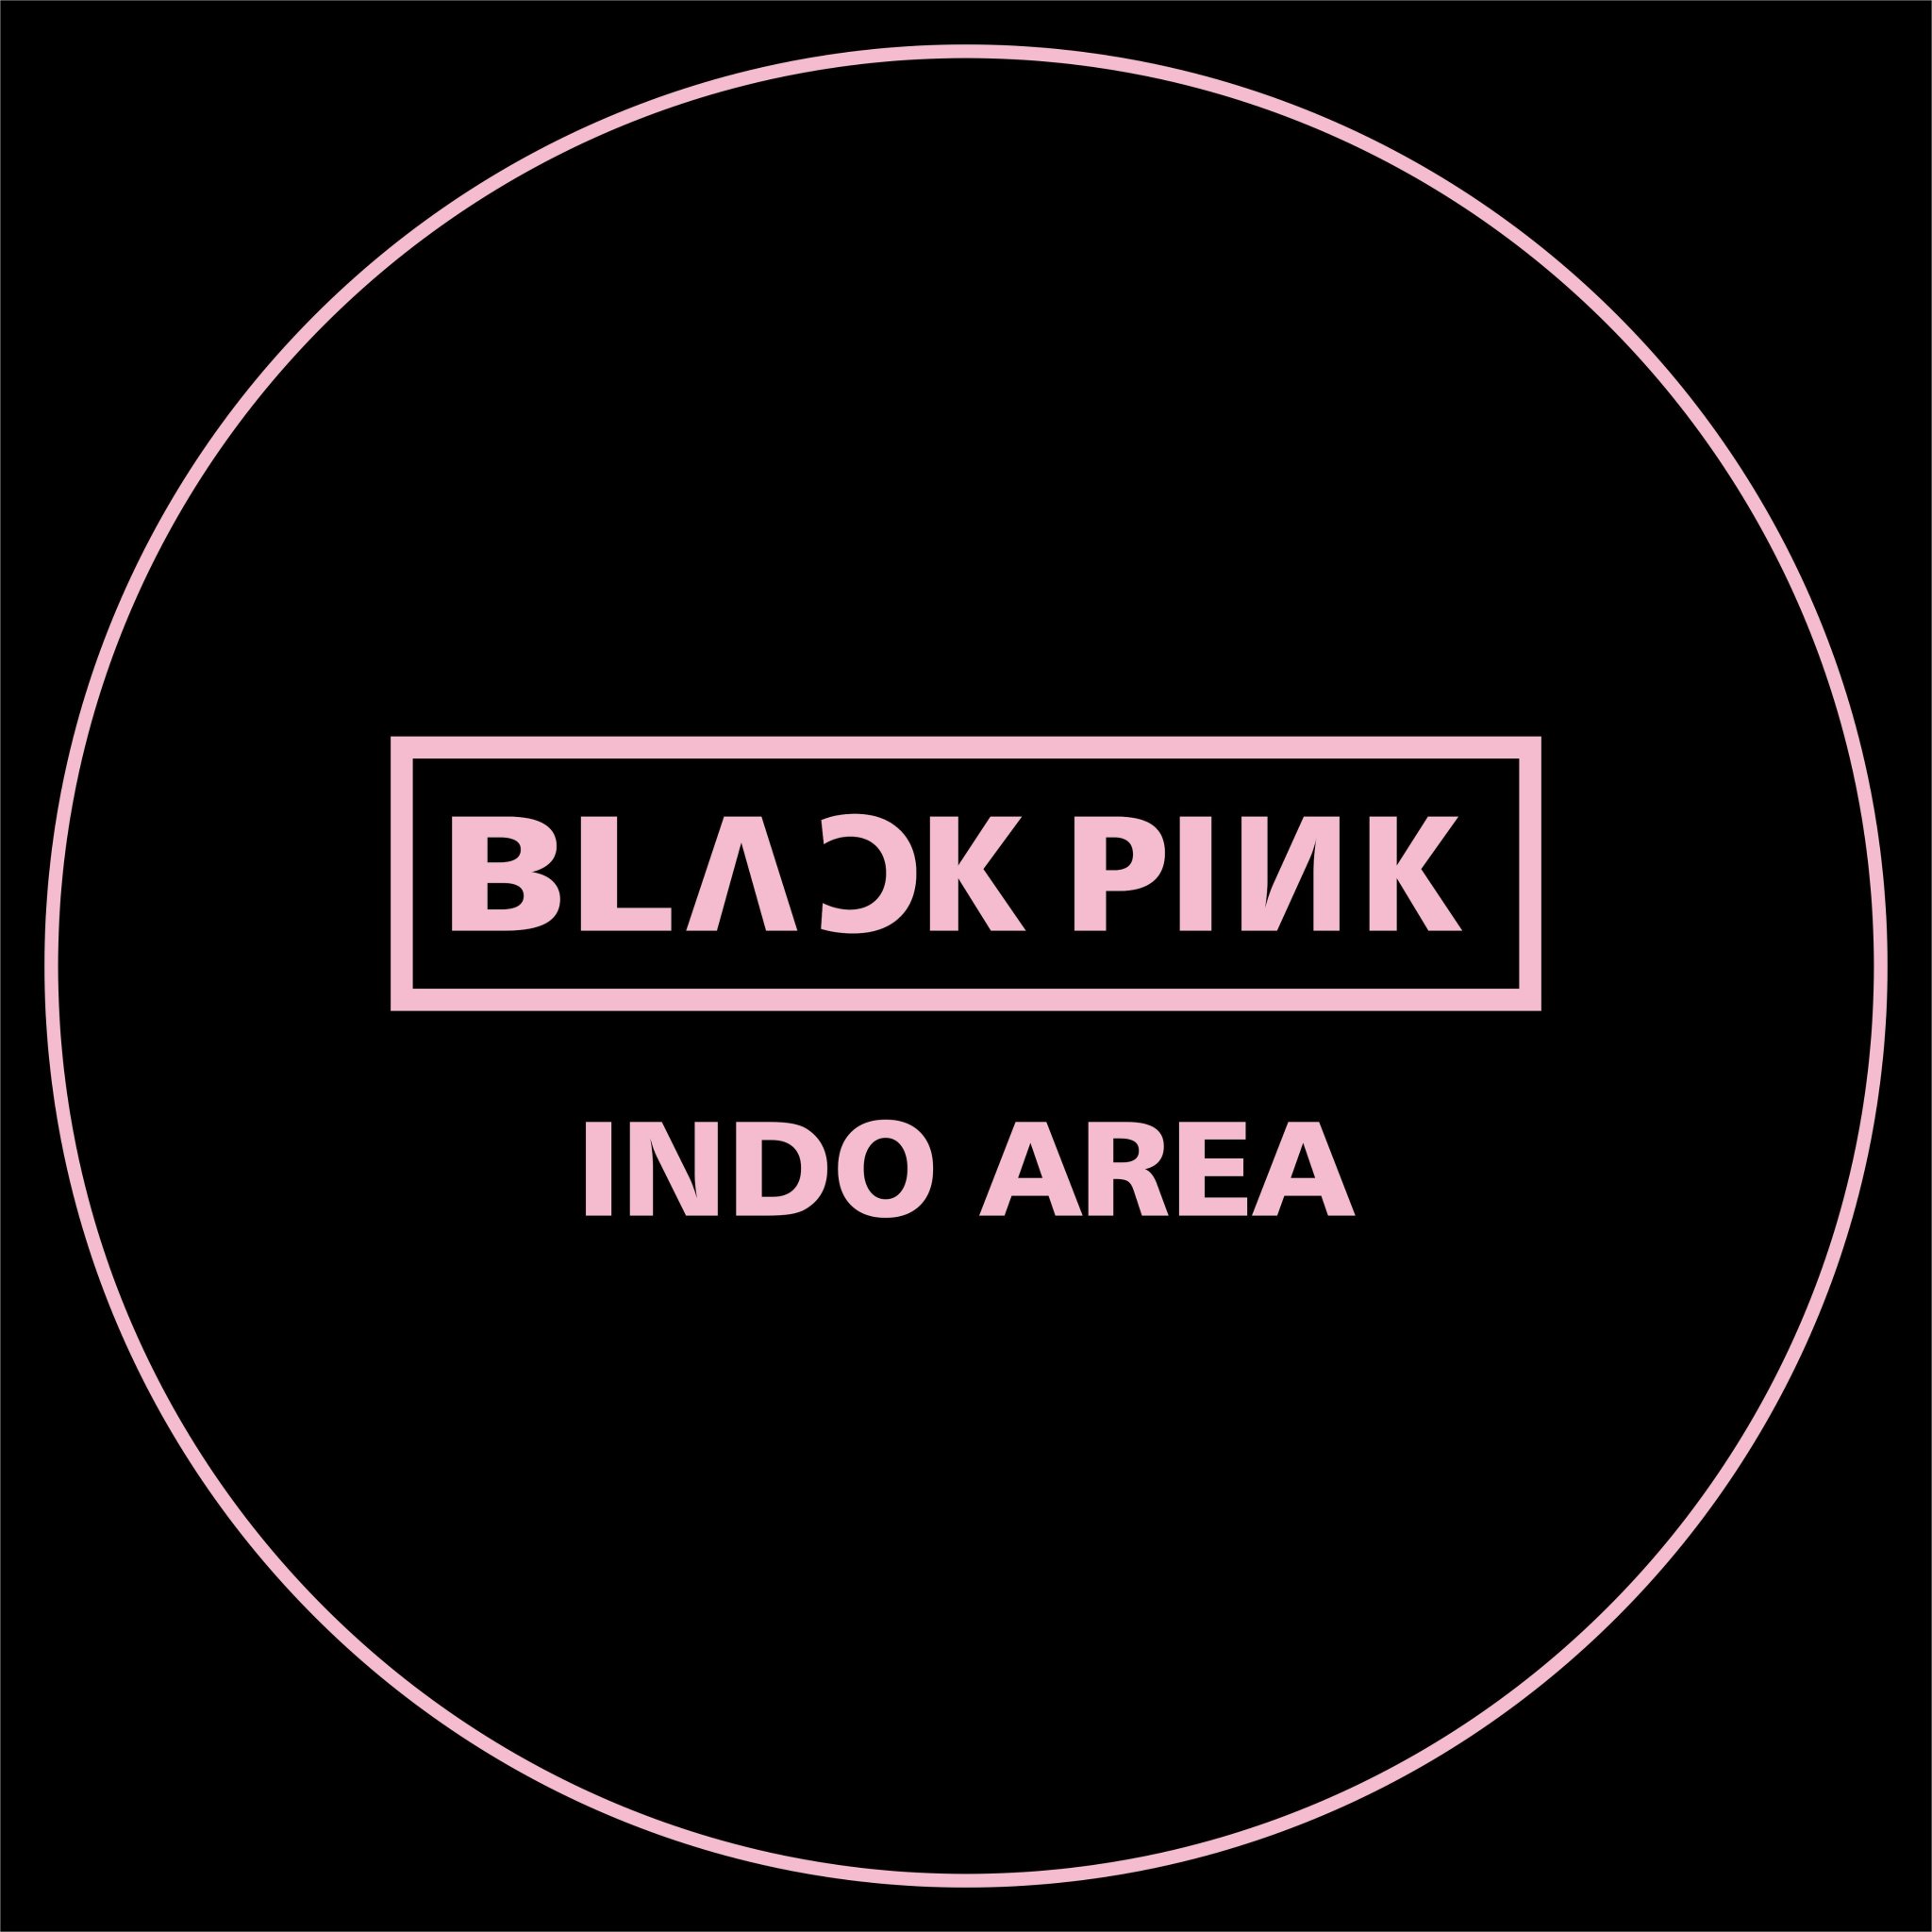 Black Pink's Indonesian Fanbase . Always support and love them ^_^